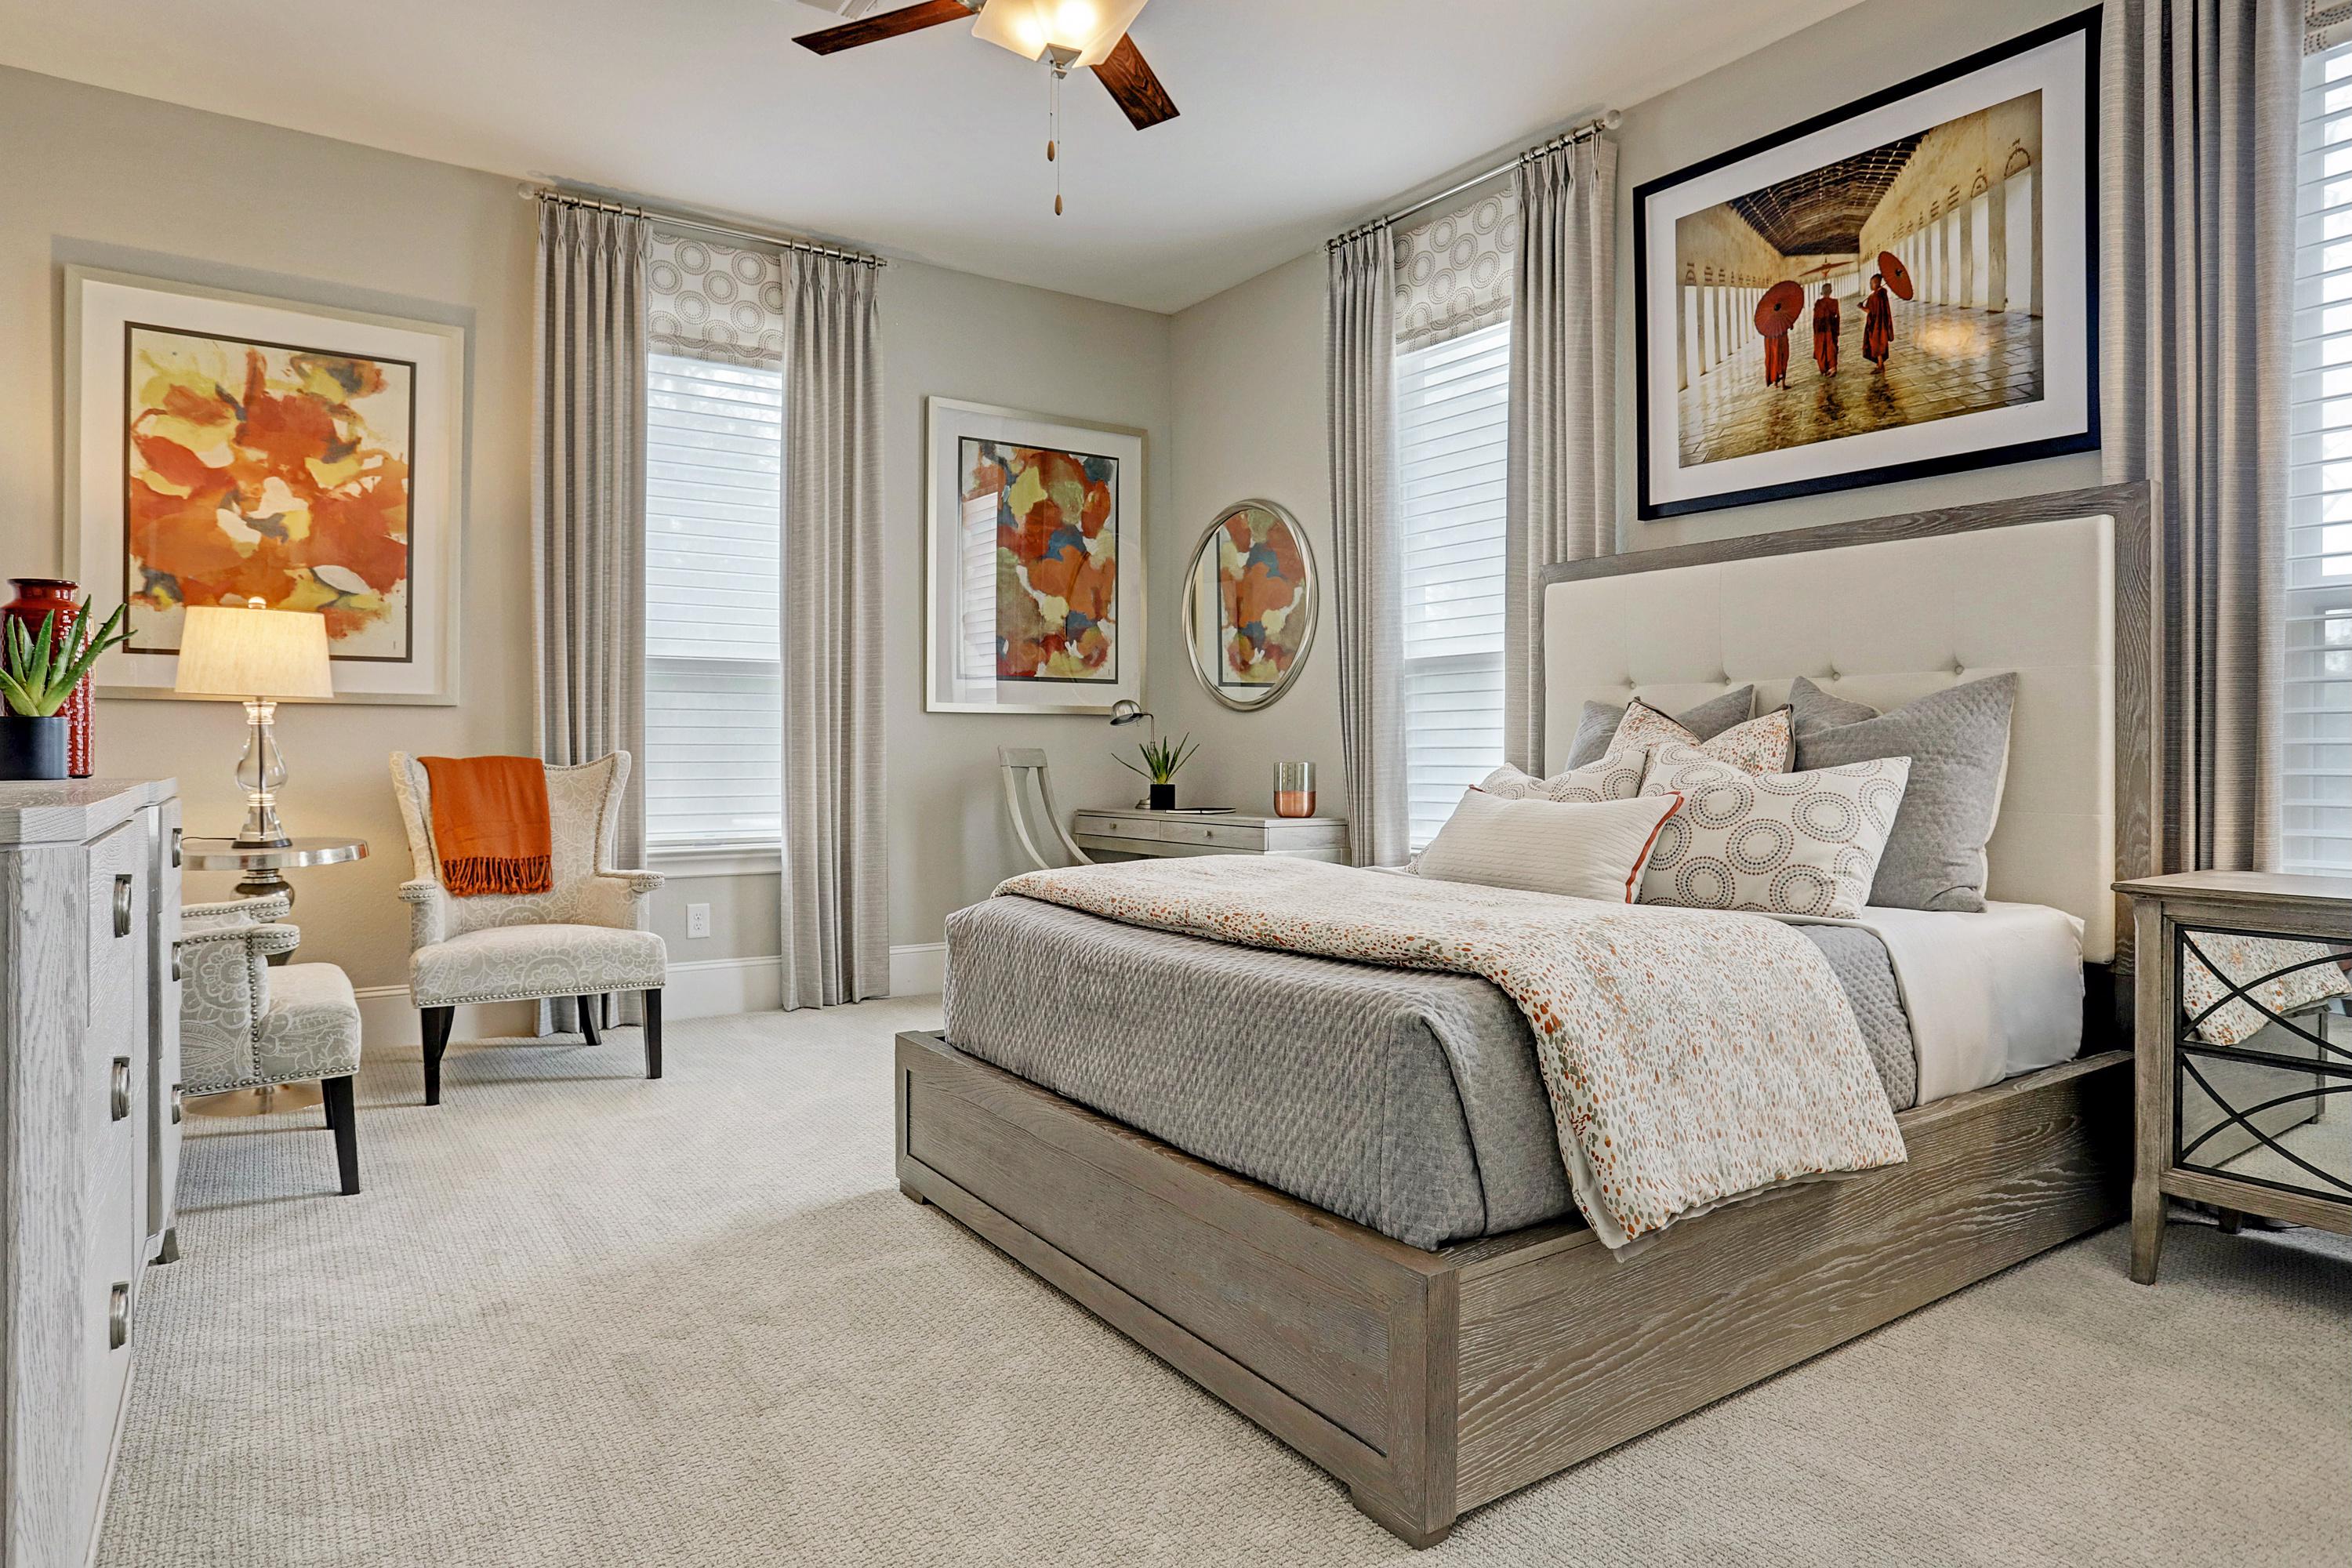 Try one of these master bedroom paint colors this year